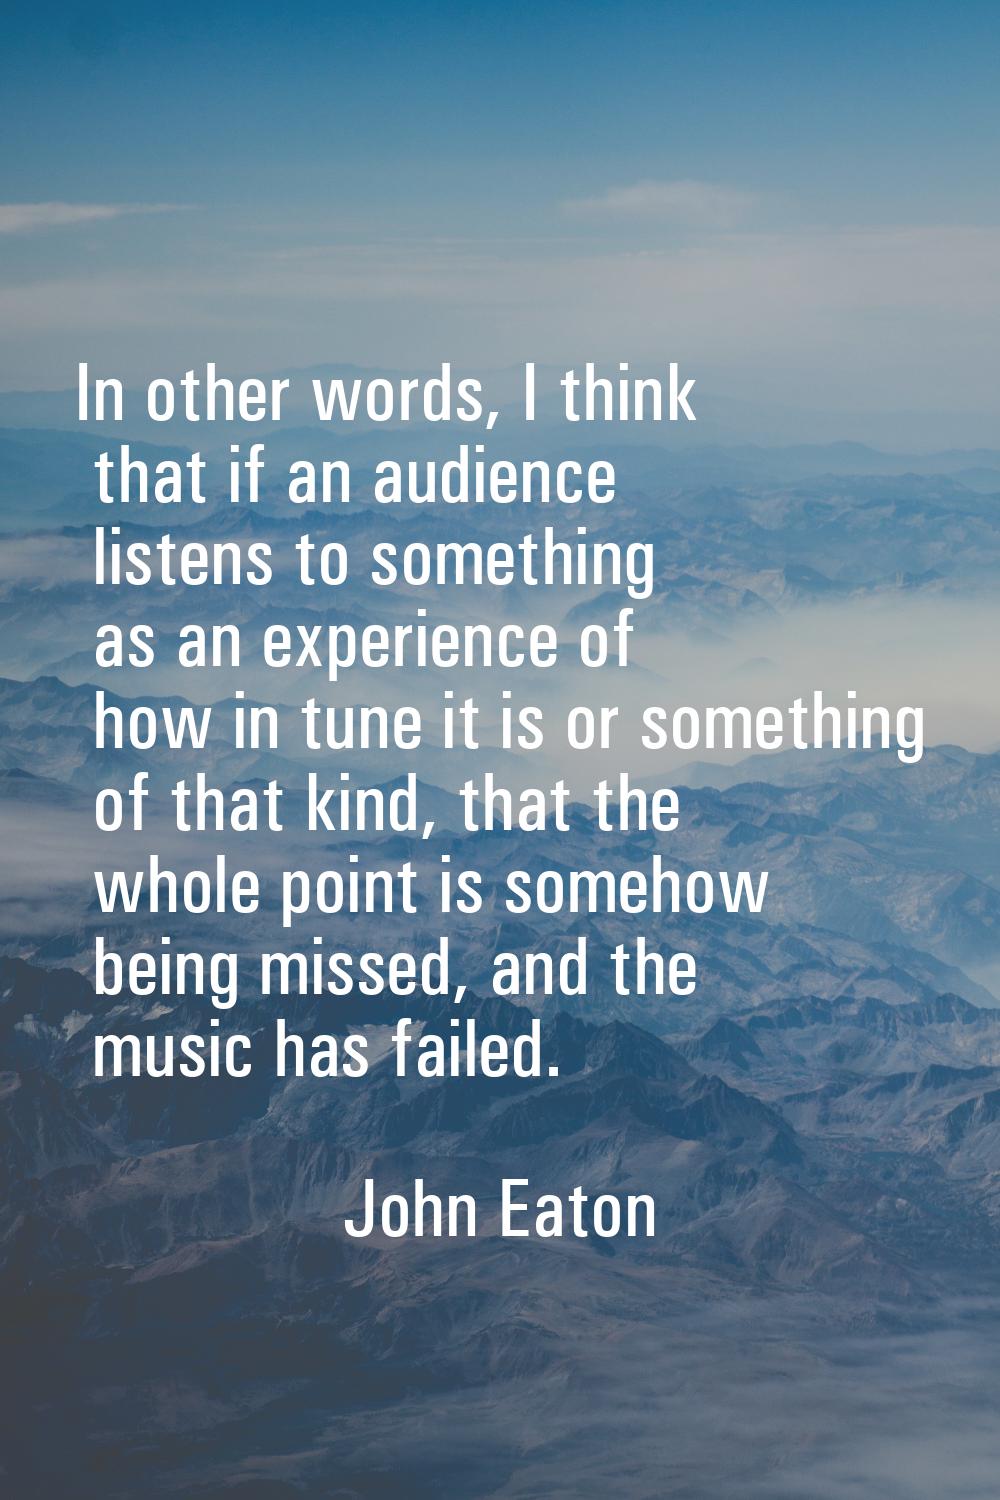 In other words, I think that if an audience listens to something as an experience of how in tune it